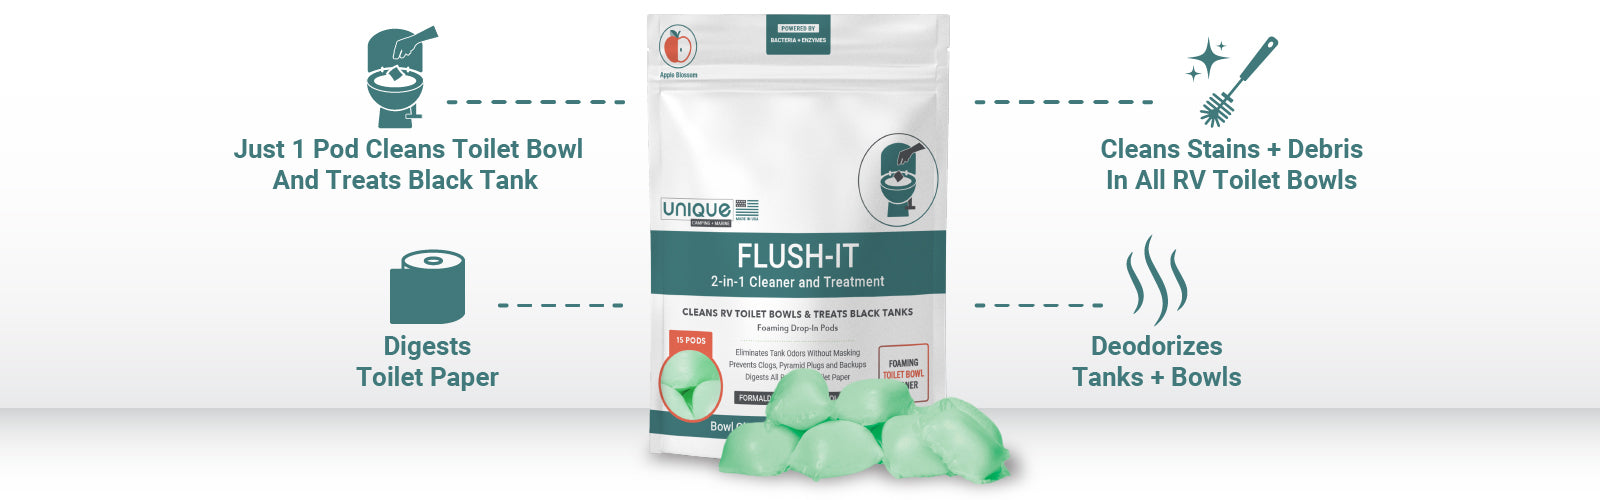 Flush-It 2-in-1 tank treatment and toilet cleaner features and benefits.